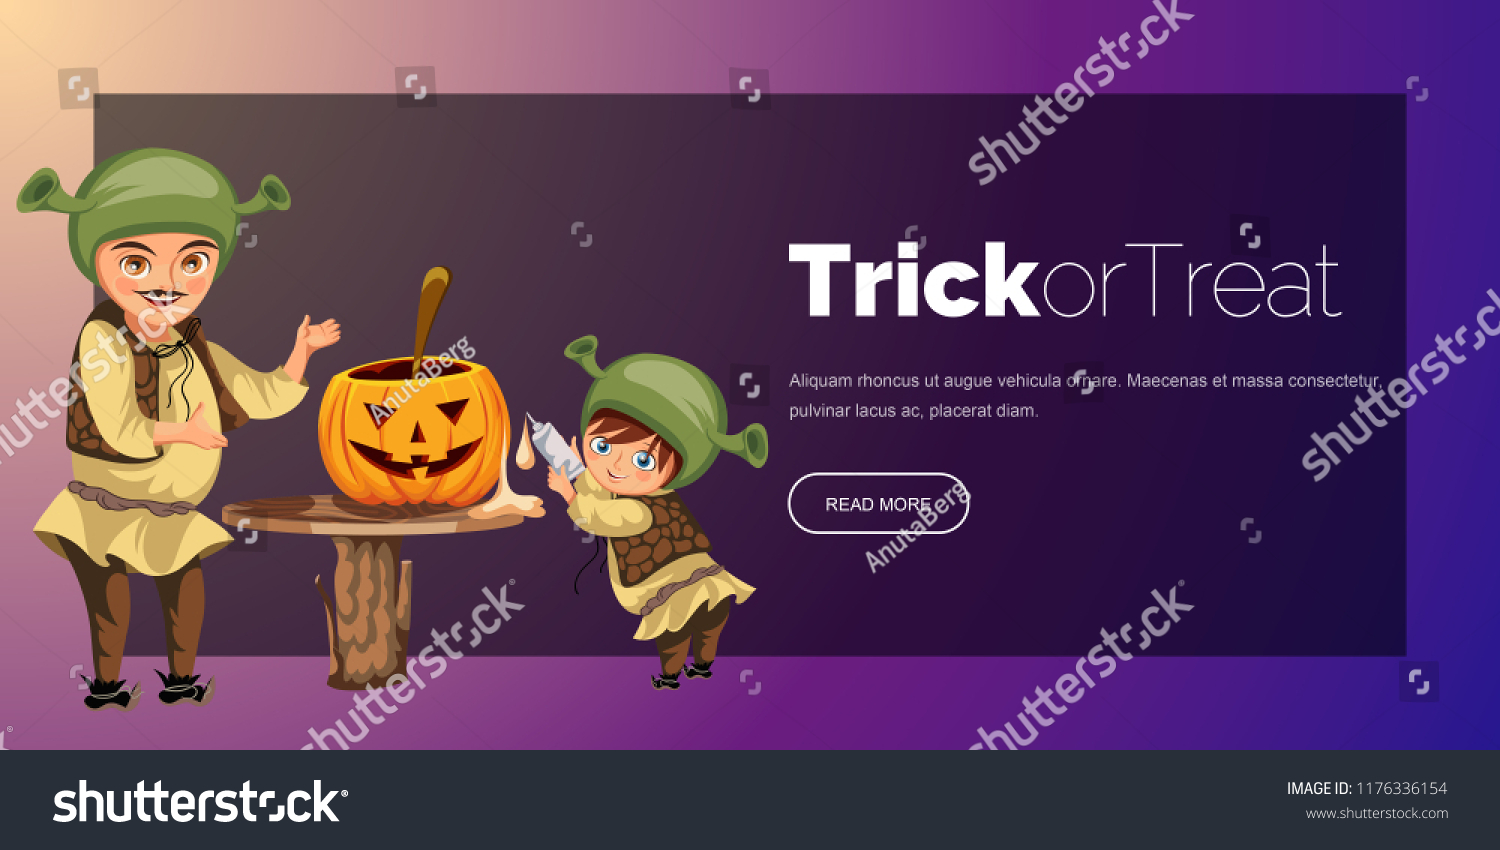 SVG of Dad with son making Halloween pumpkin poster svg